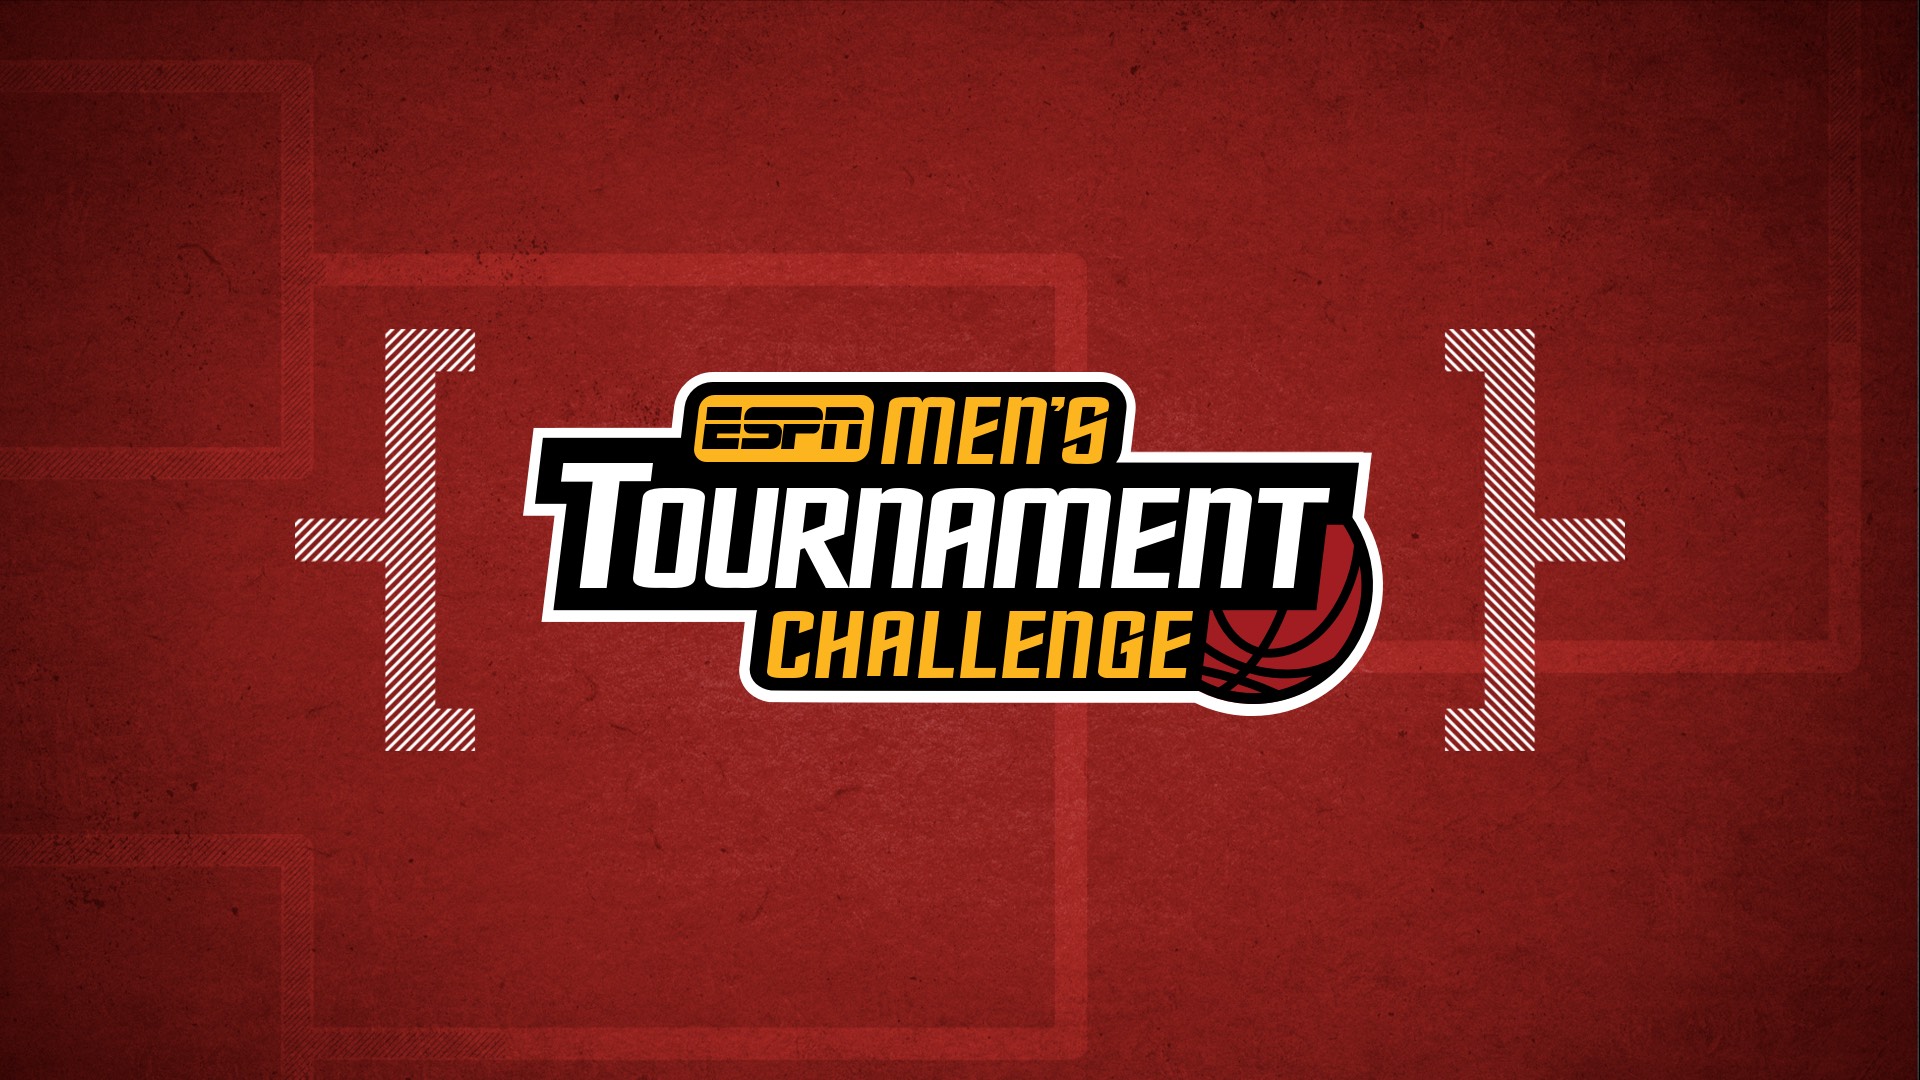 March Madness 2022 - Ranking the best NCAA men's basketball tournaments